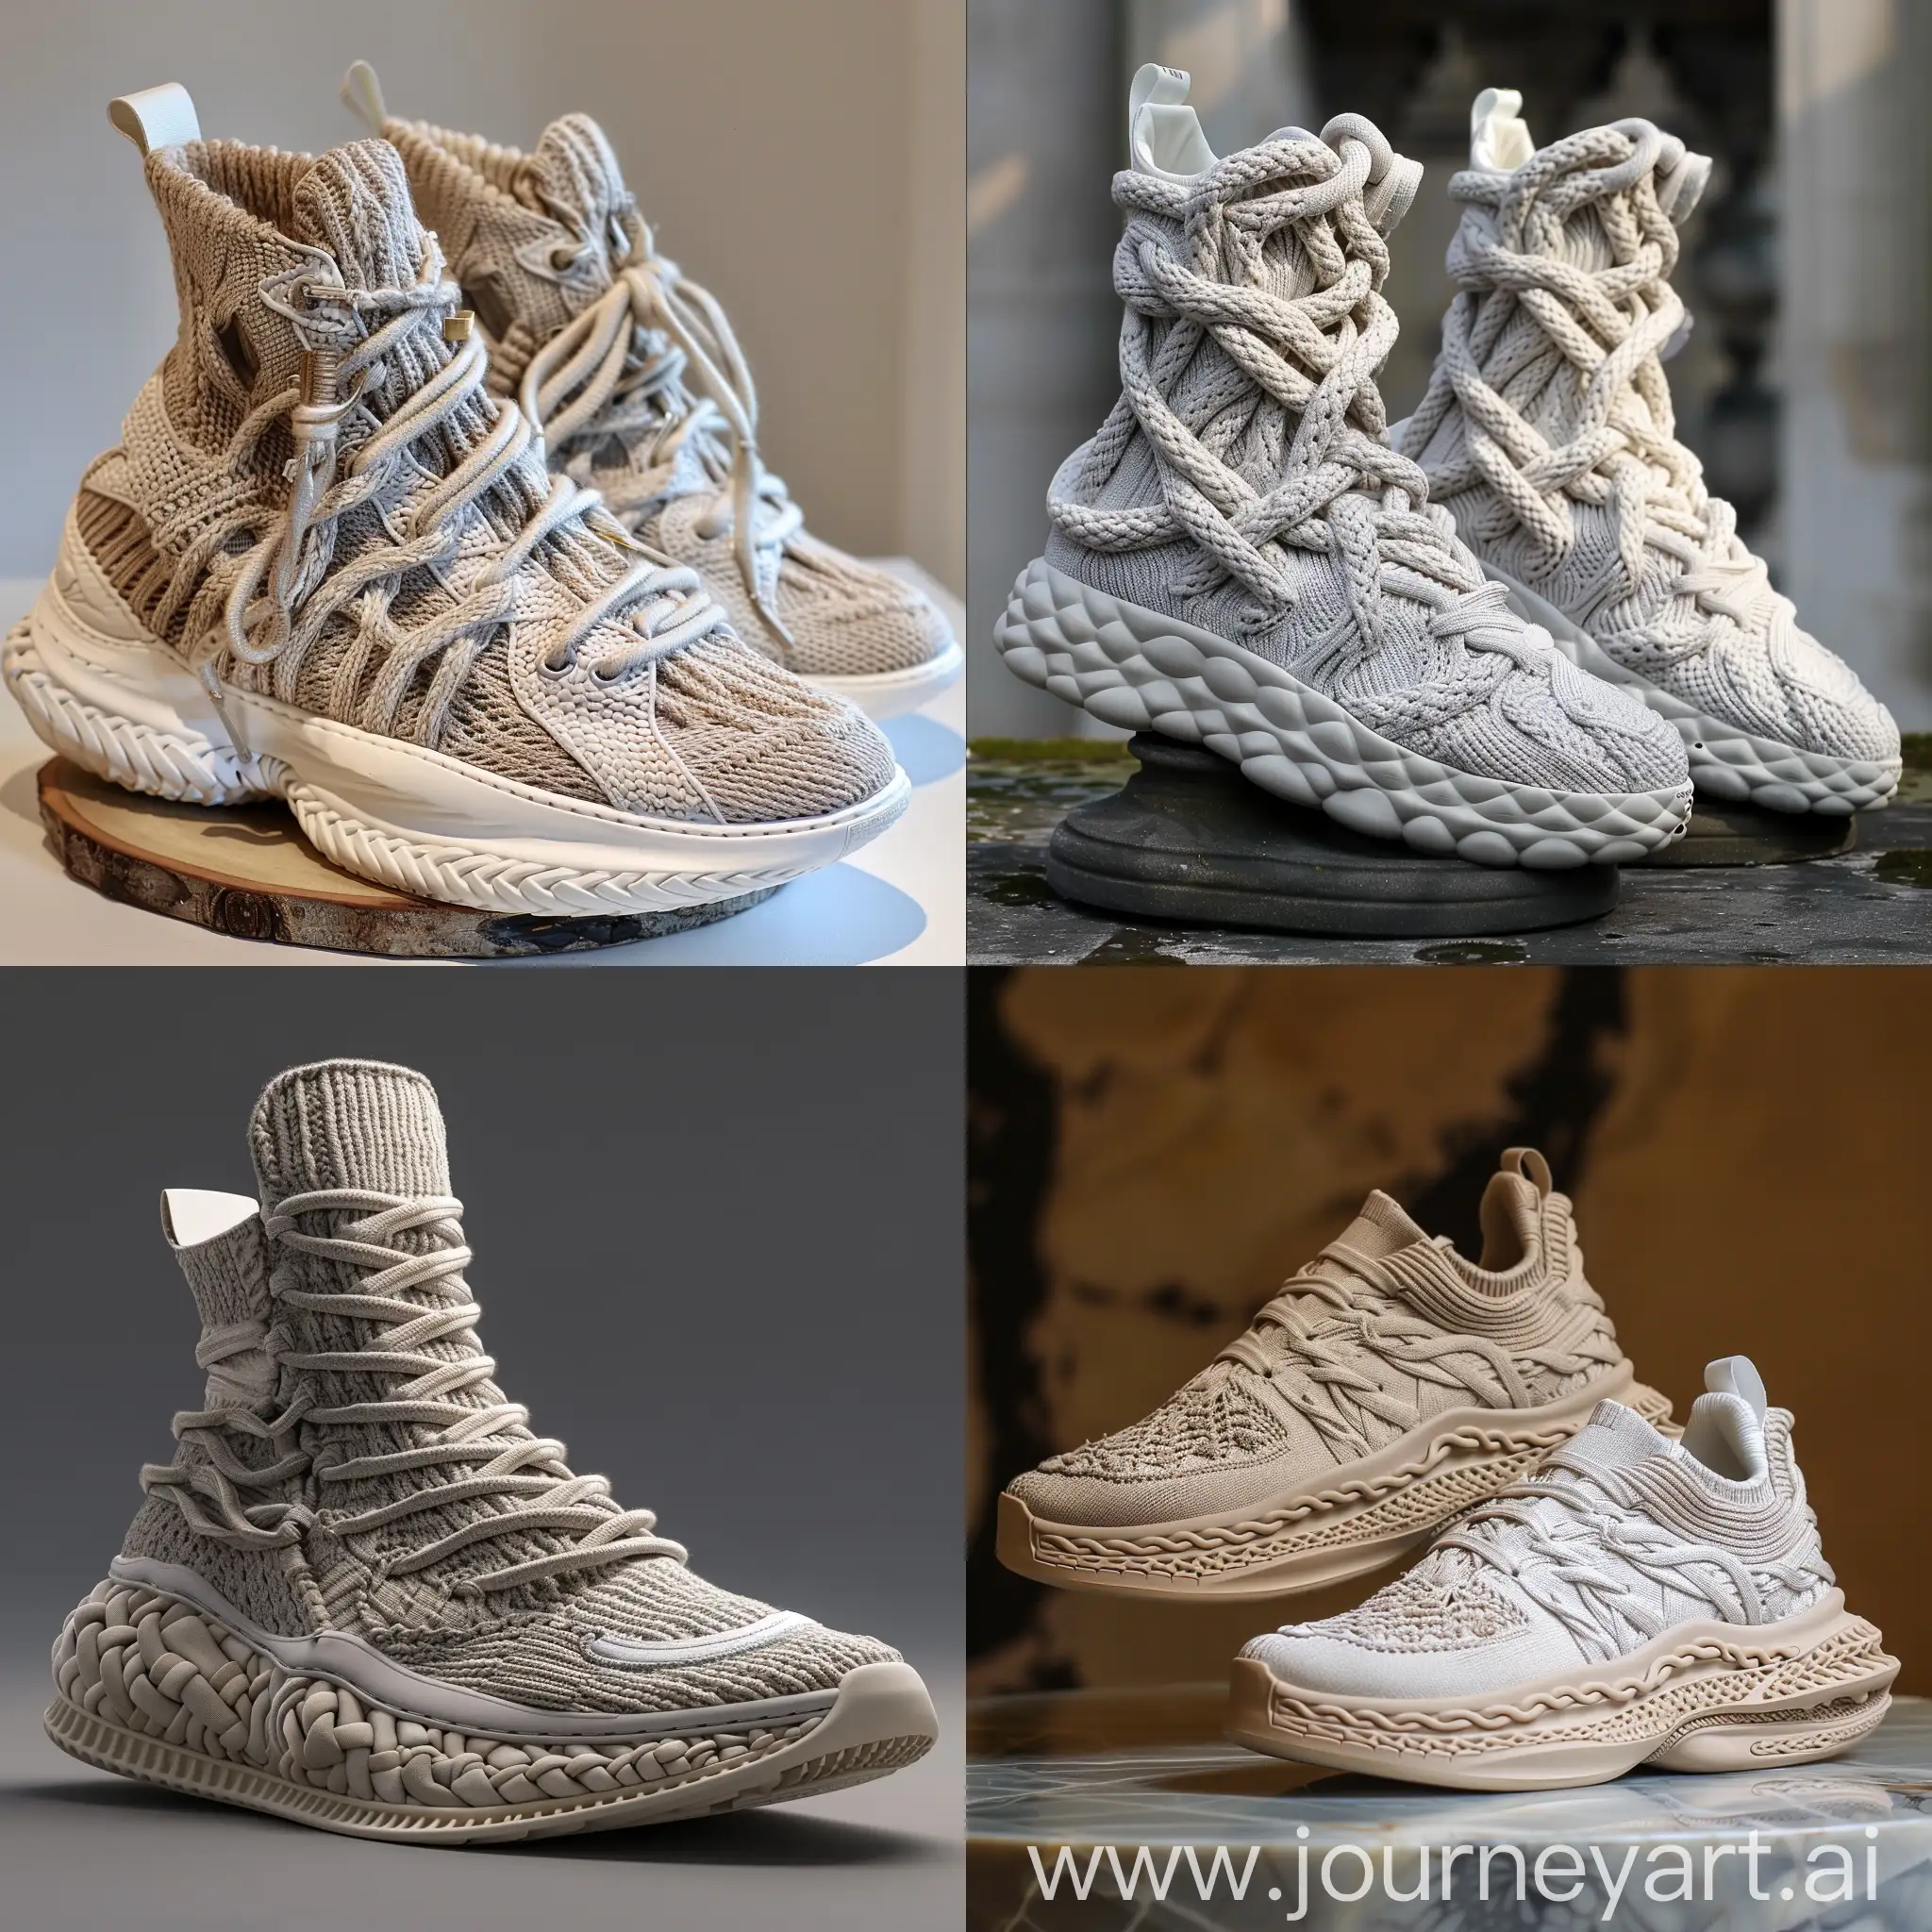 Knitted-Cable-Fabric-Inspired-Alexander-McQueen-Sneakers-for-Hip-Hop-and-Skating